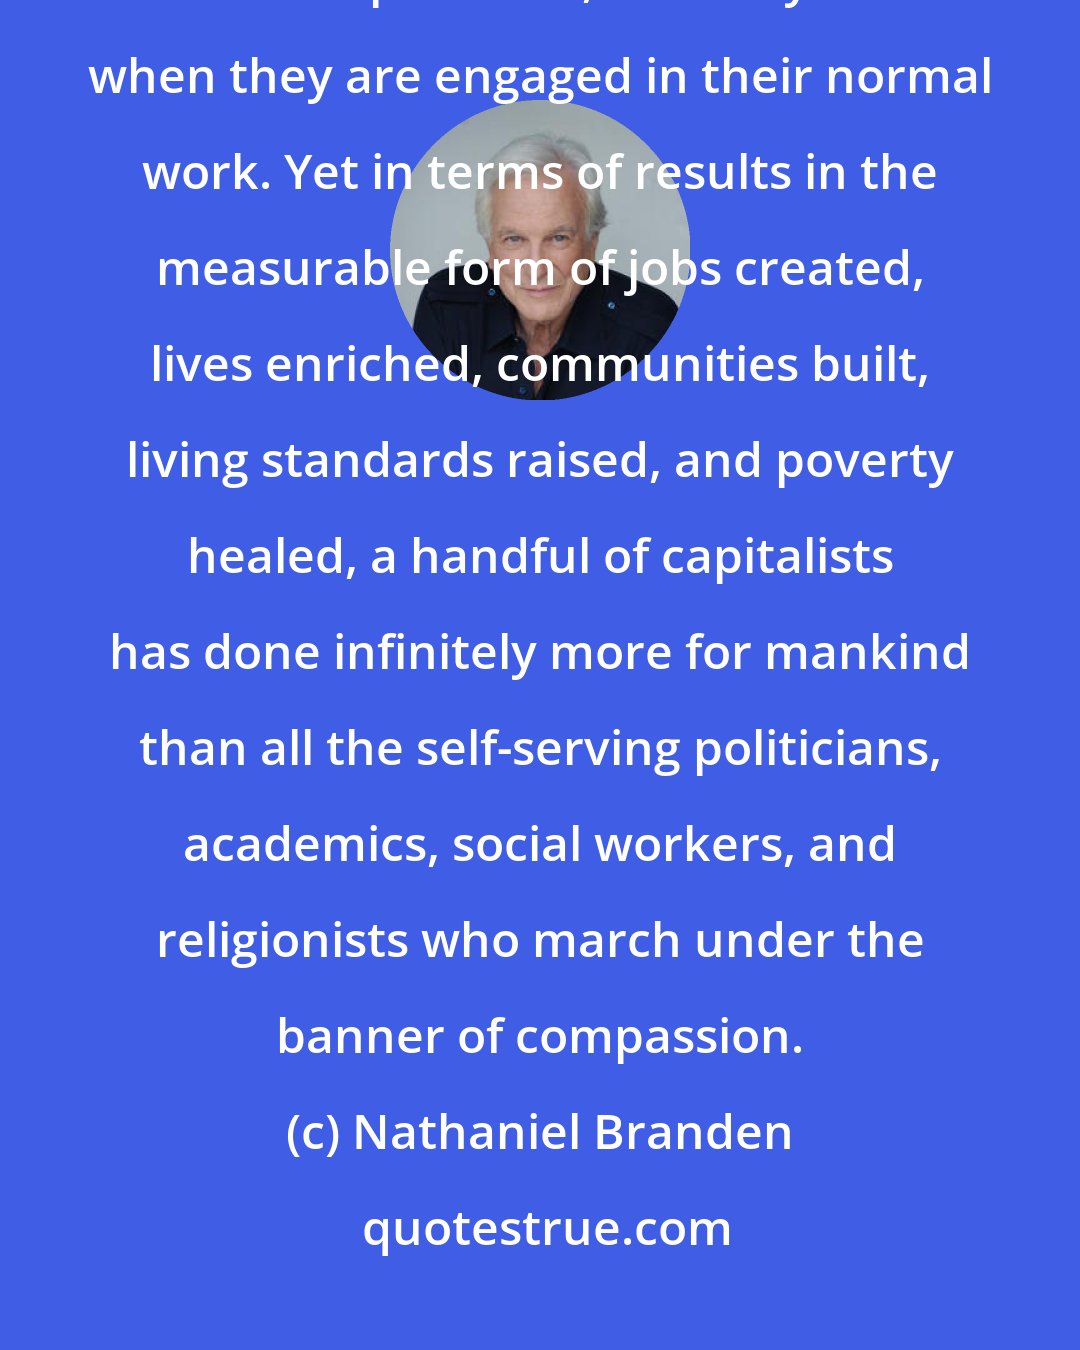 Nathaniel Branden: We do not hear the term compassionate applied to business executives or entrepreneurs, certainly not when they are engaged in their normal work. Yet in terms of results in the measurable form of jobs created, lives enriched, communities built, living standards raised, and poverty healed, a handful of capitalists has done infinitely more for mankind than all the self-serving politicians, academics, social workers, and religionists who march under the banner of compassion.